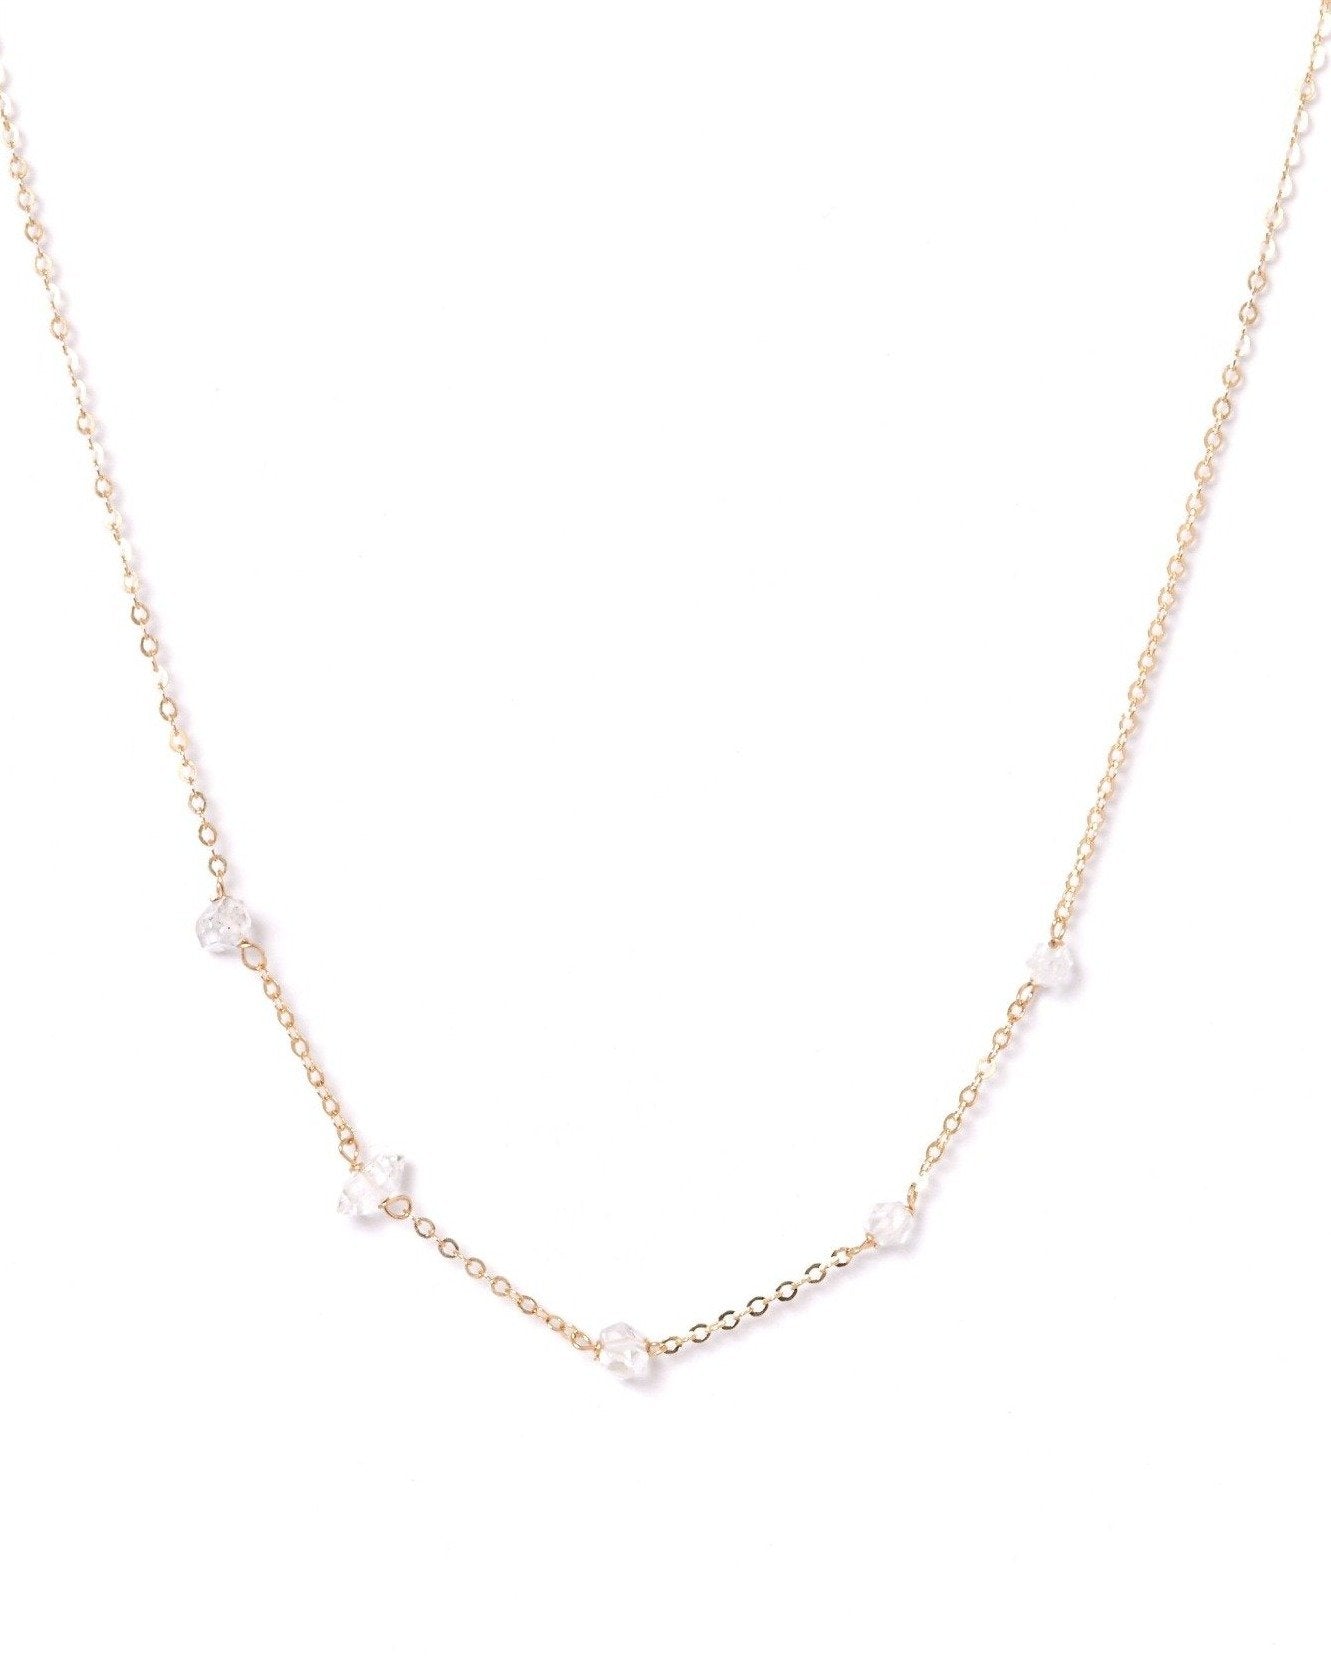 Cinq Herkimer Necklace by KOZAKH. A 16 inch long necklace in 14K Gold Filled, featuring Herkimer Diamonds.